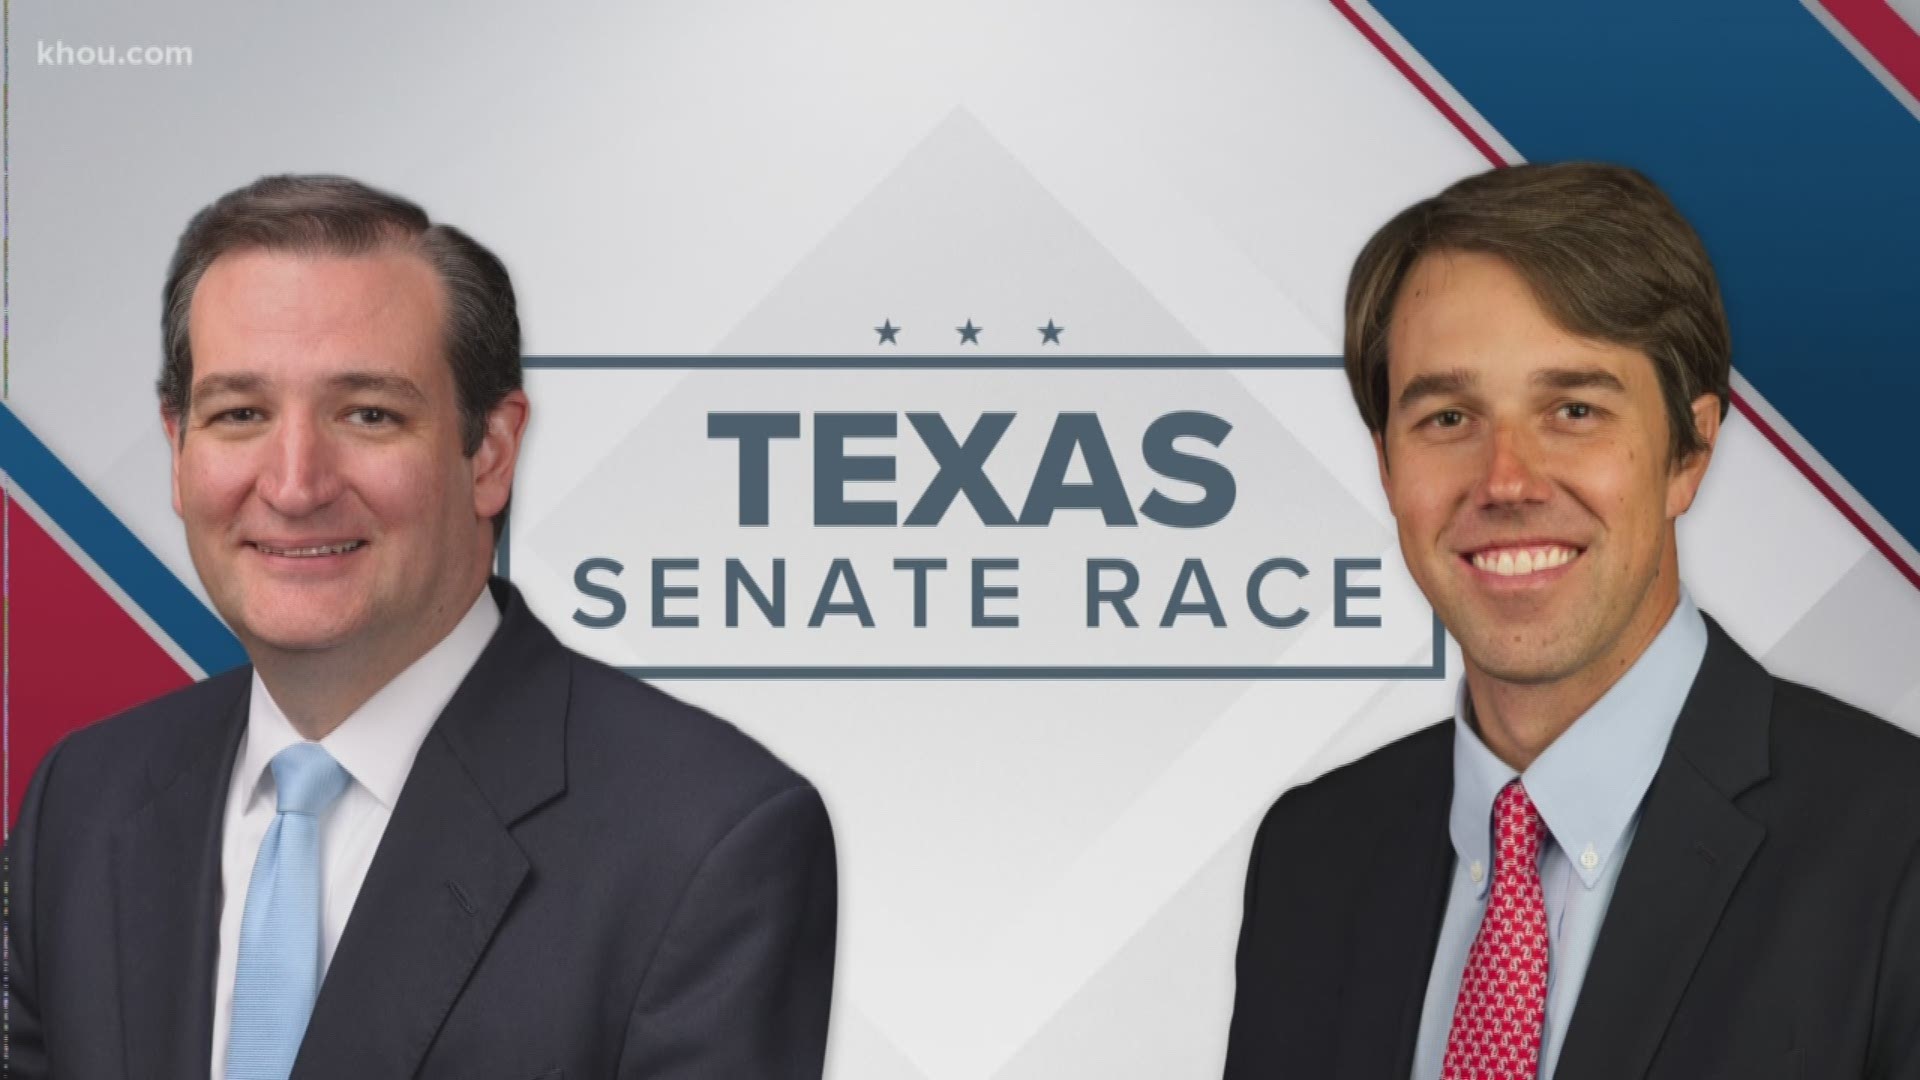 A new poll shows incumbent Sen. Ted Cruz holding his lead over Congressman Beto O'Rourke by 7 percentage points.